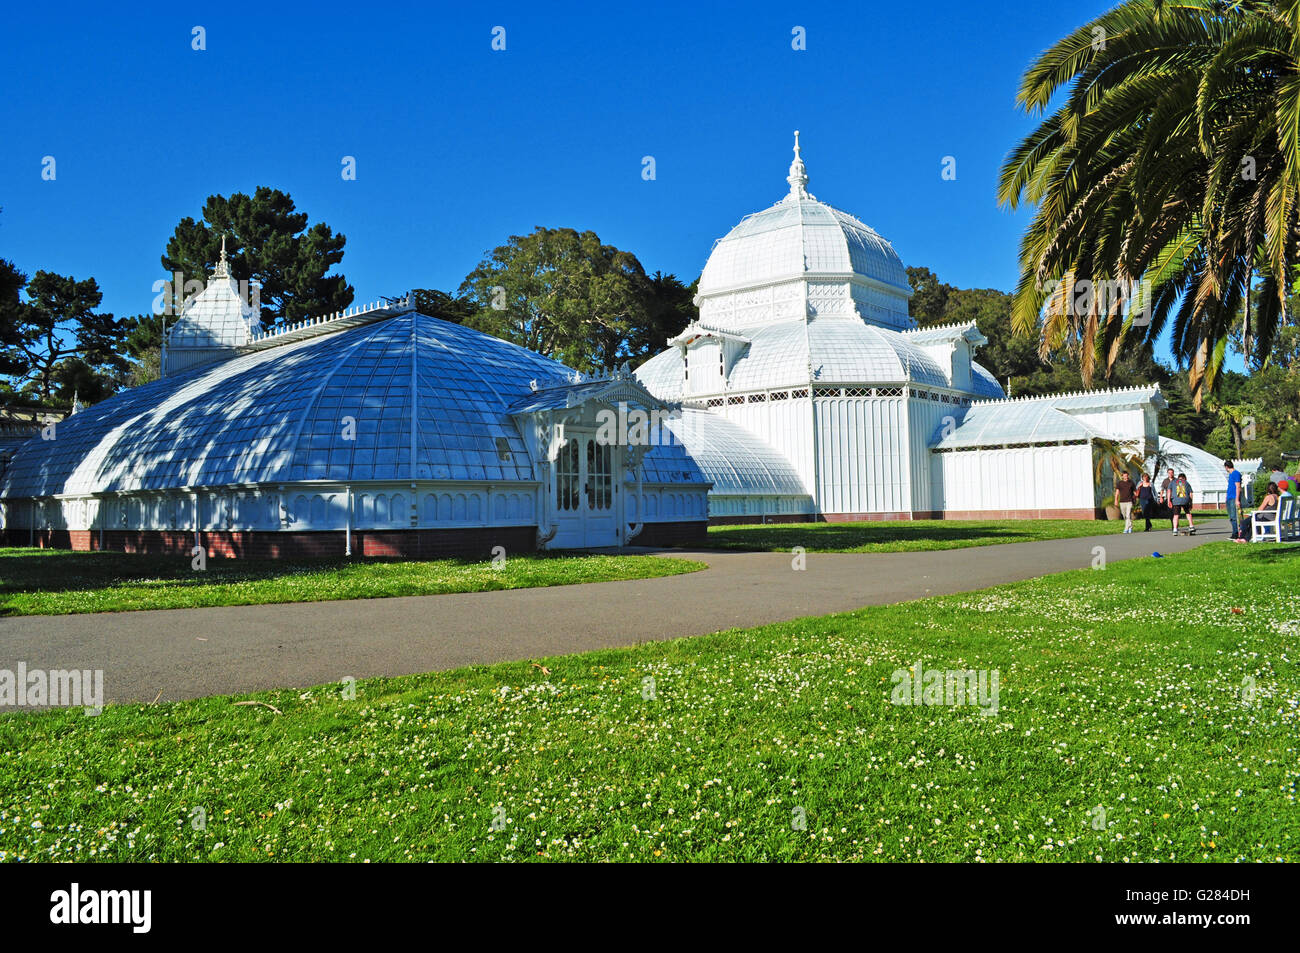 San Francisco: the Conservatory of Flowers, greenhouse and botanical garden that houses a collection of rare and exotic plants in Golden Gate Park Stock Photo